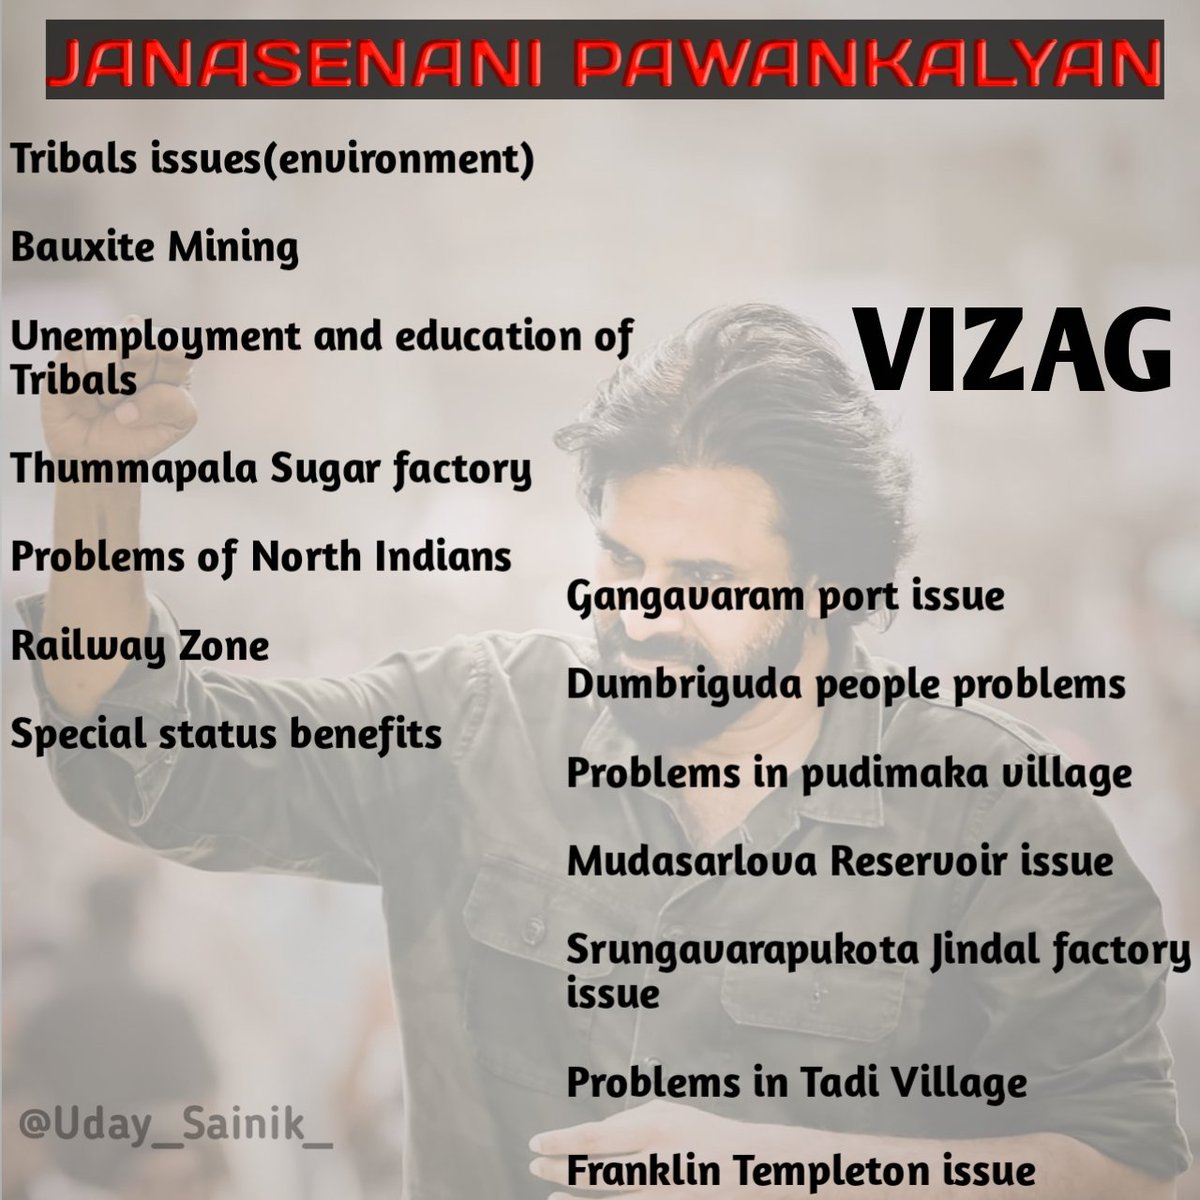 A Thread Of Pics Which gives info on fewProblems/Issues that were addressed/solved/questioned&raised by Our Janasenani  @PawanKalyan over the years before elections....